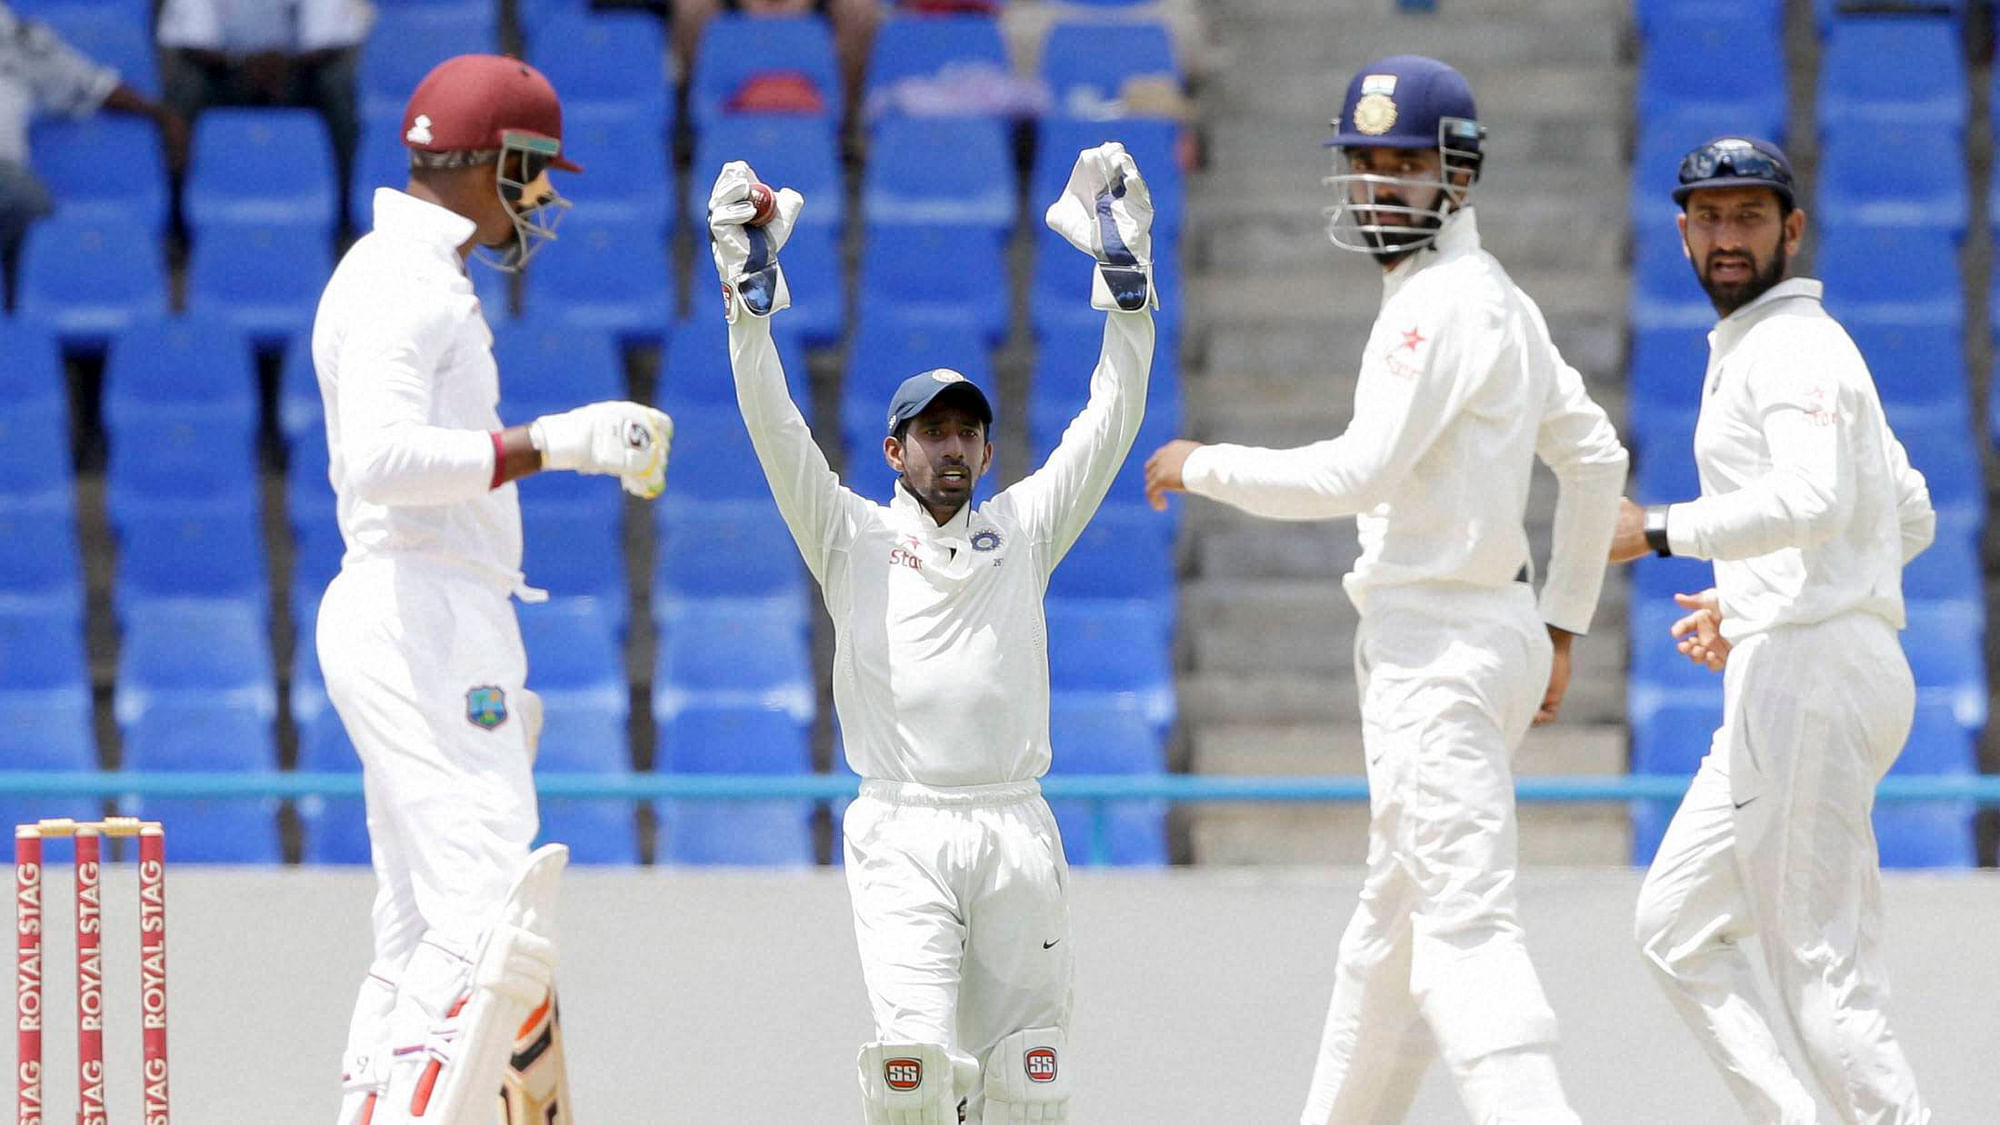 Indian wicket keeper Wriddhiman Saha appeals during day four in first Test Match at Antigua. (Photo: PTI)